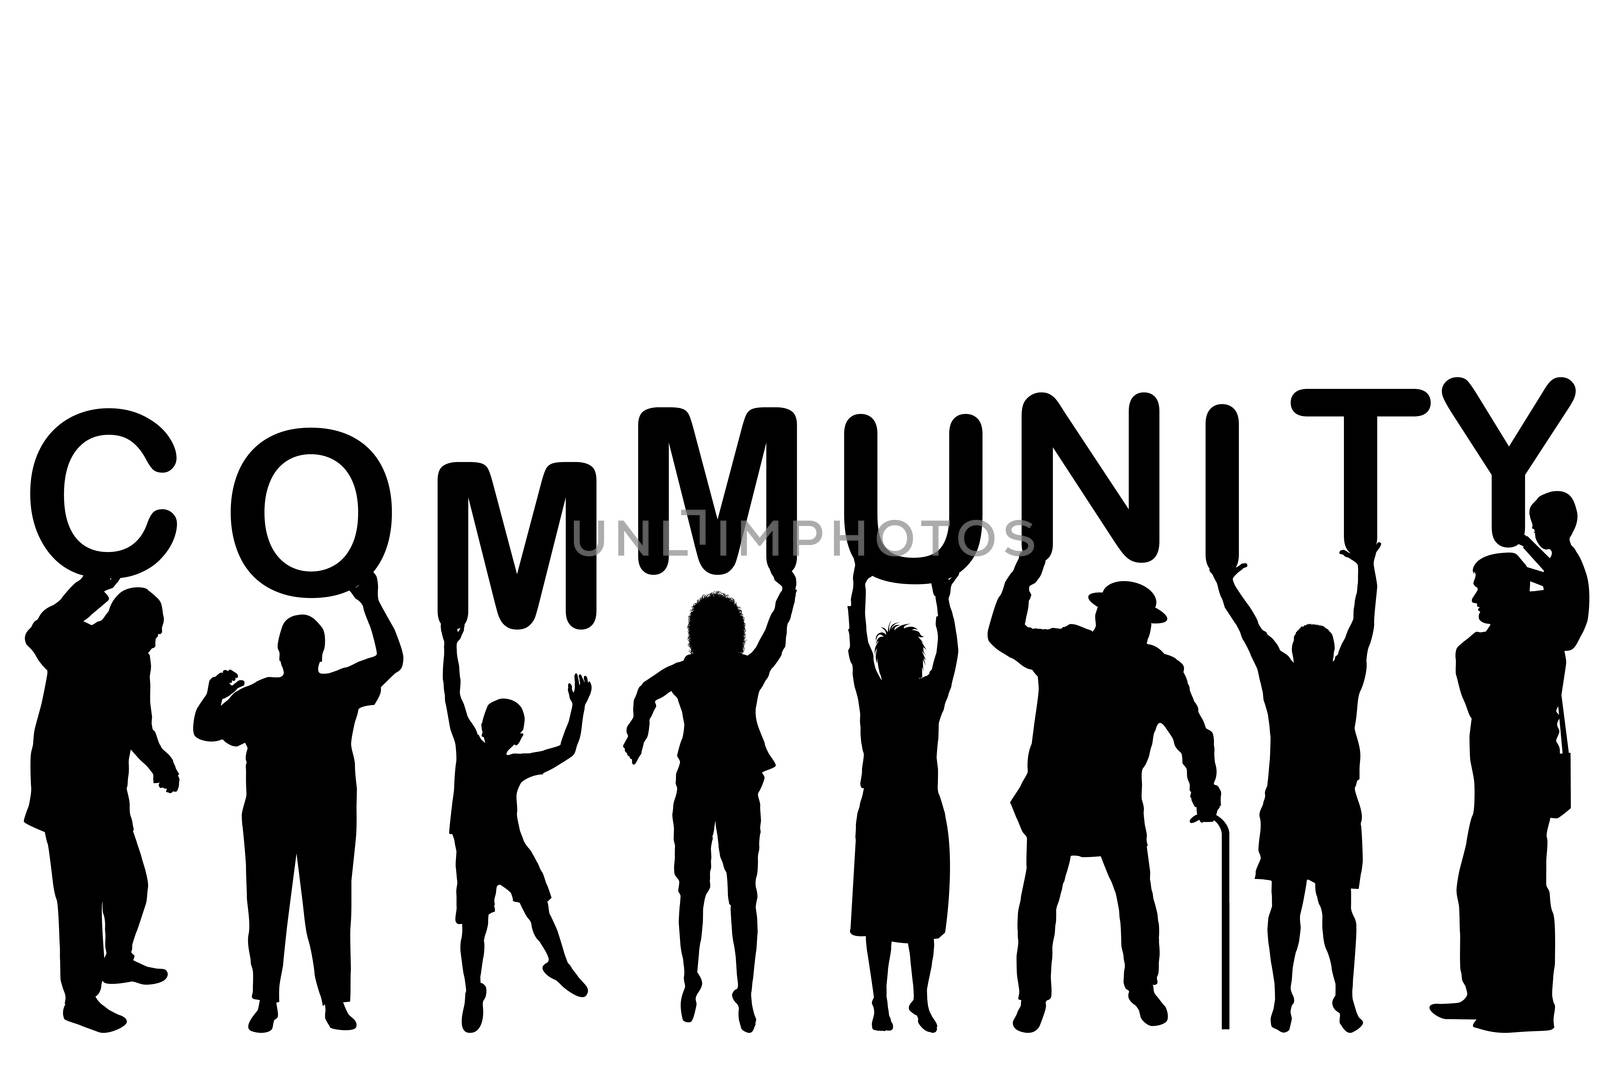 Community concept with people silhouettes by hibrida13